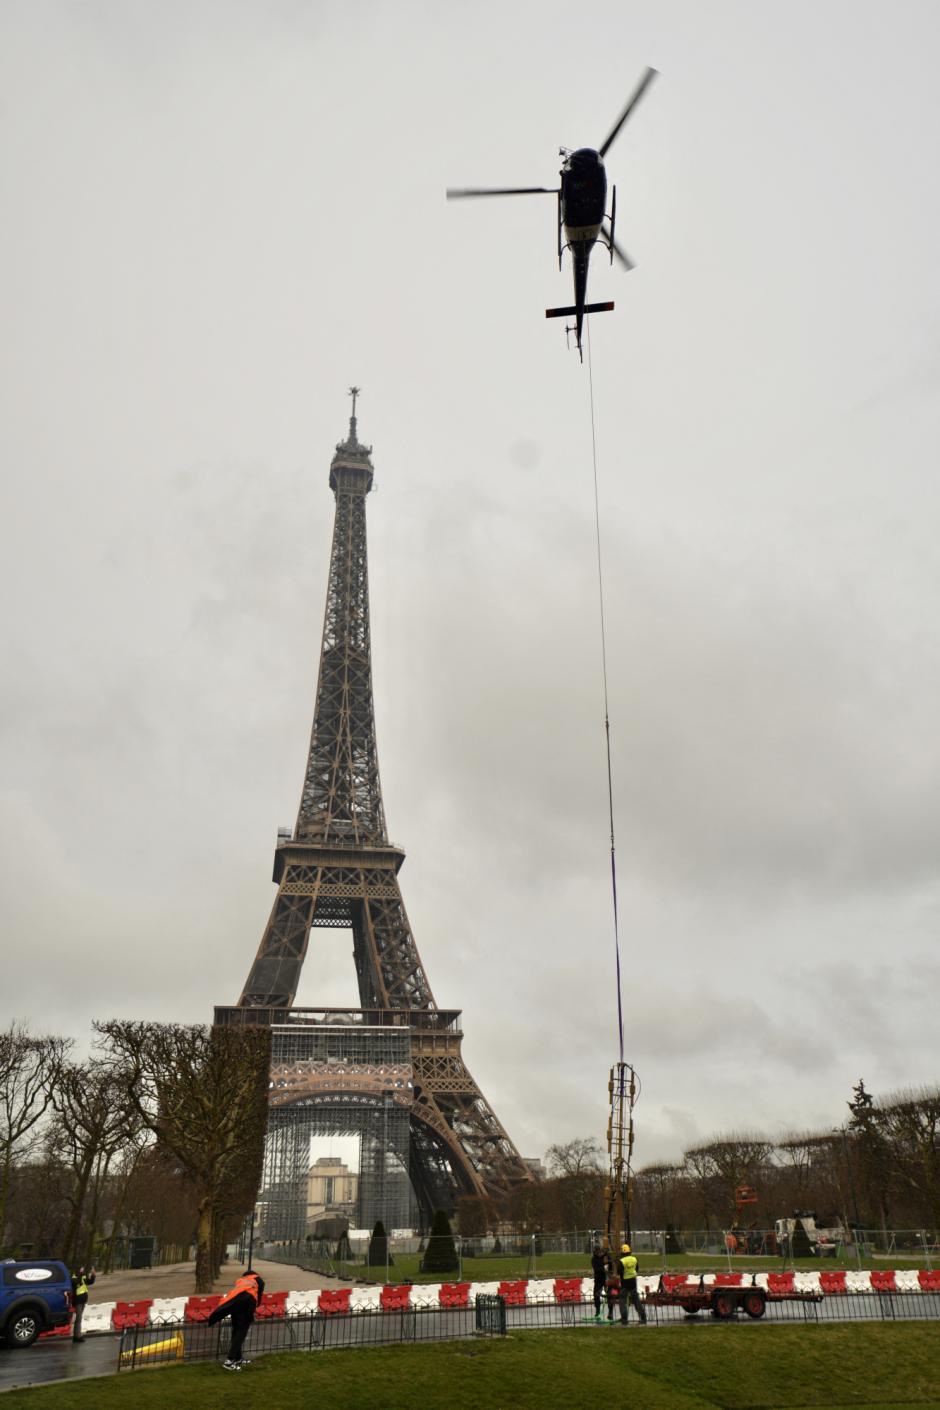 A new antenna is installed by a Eurocopter AS355N Ecureuil 2 at the top of the Eiffel Tower on March 15, 2022 in Paris, France.